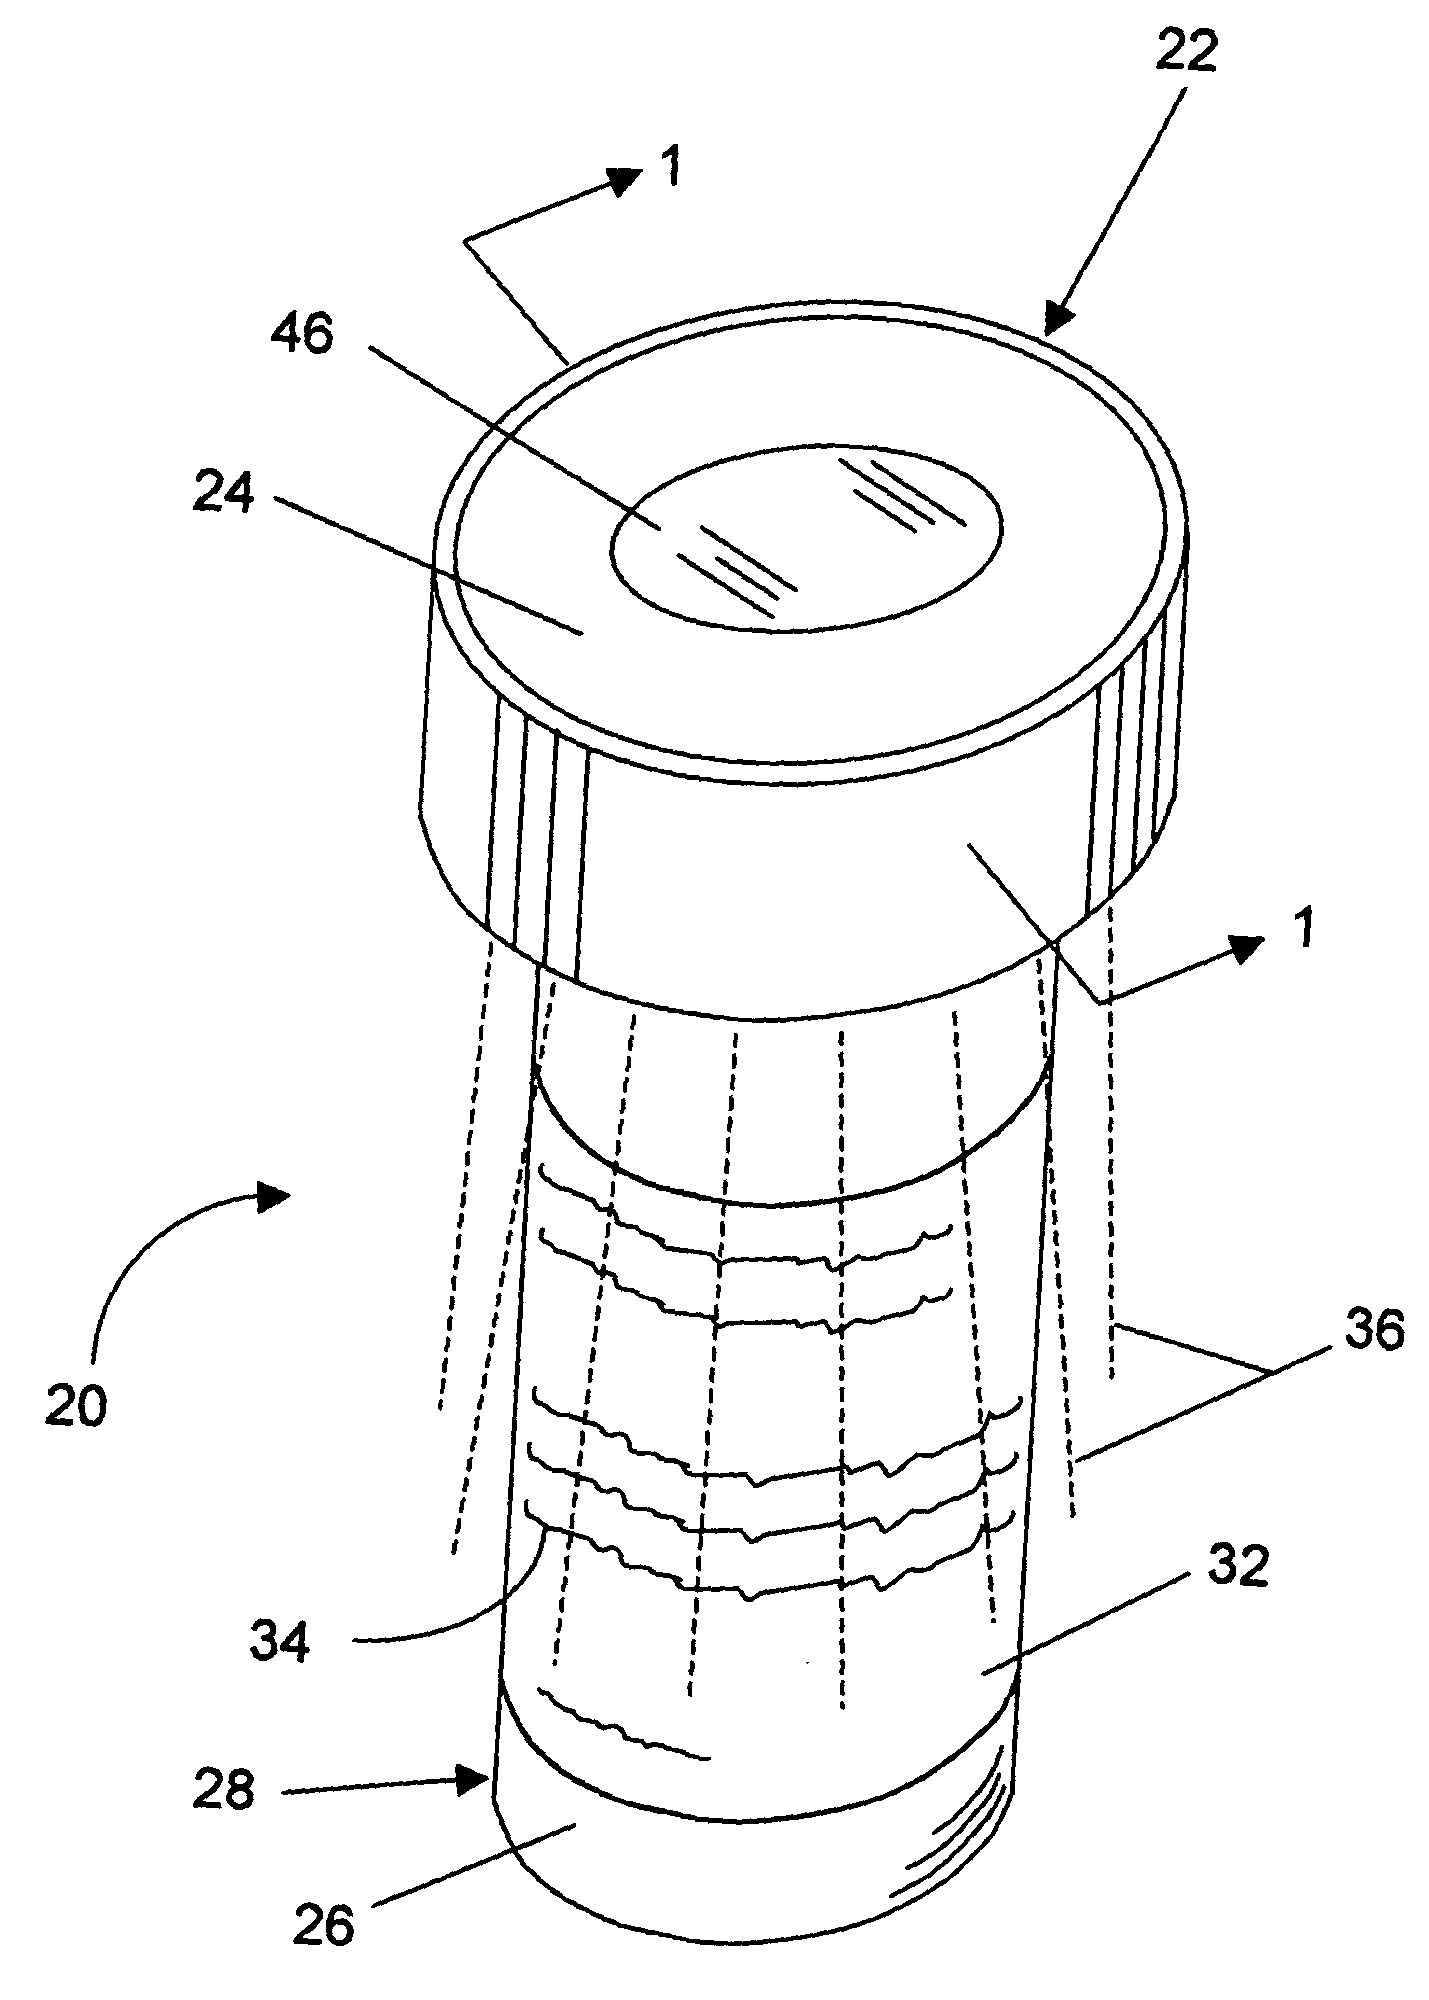 Self-contained illumination device for medicine containers